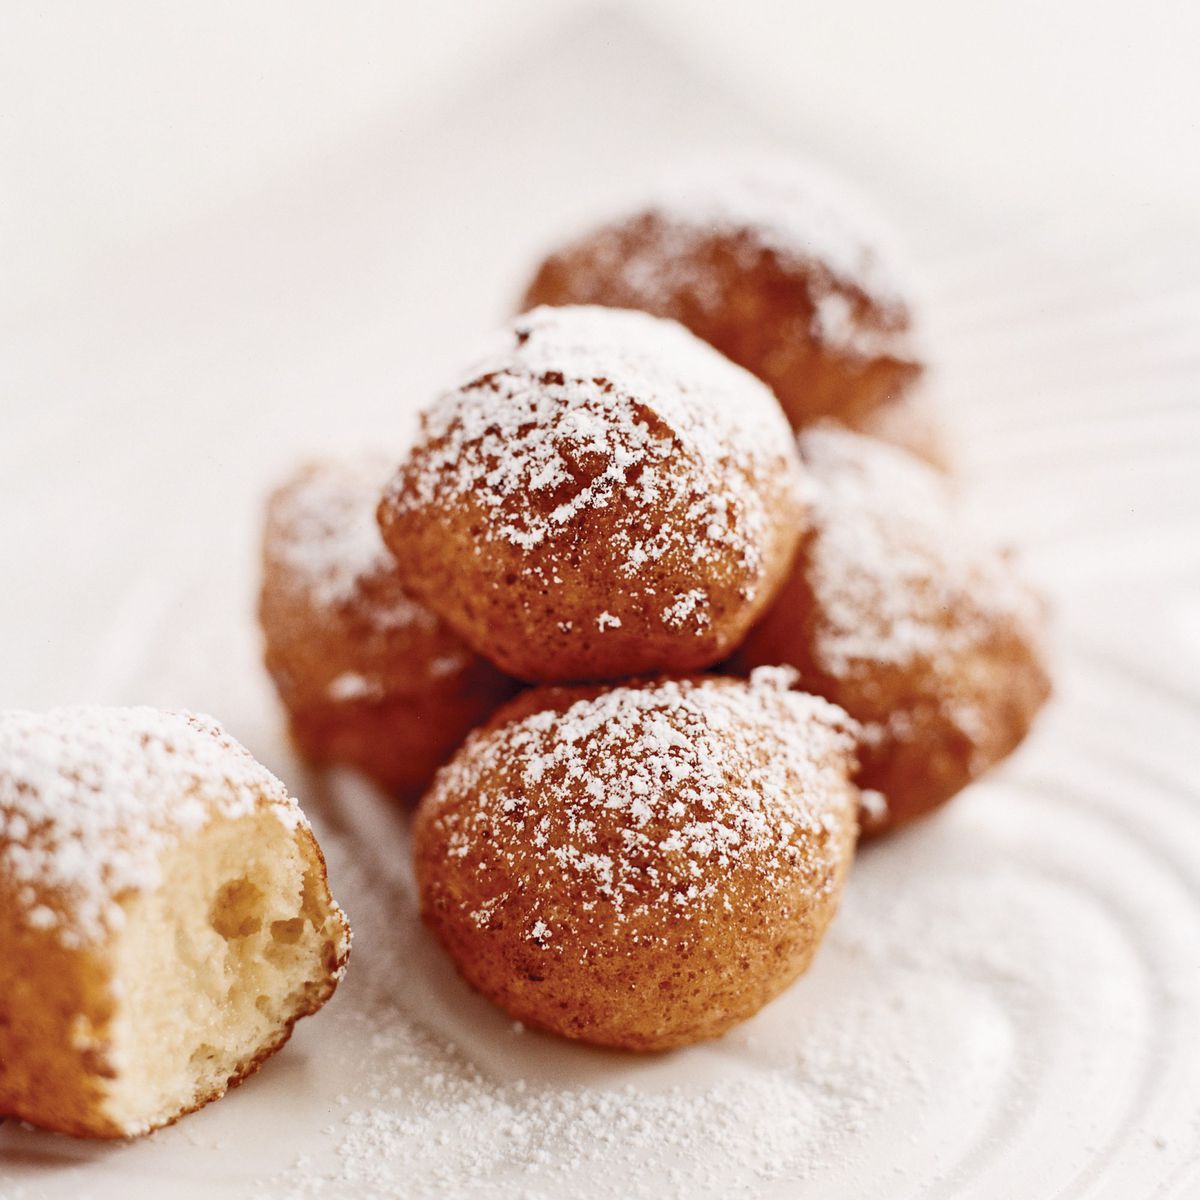 Gale Gand's Sugar-Dusted Vanilla Ricotta Fritters 